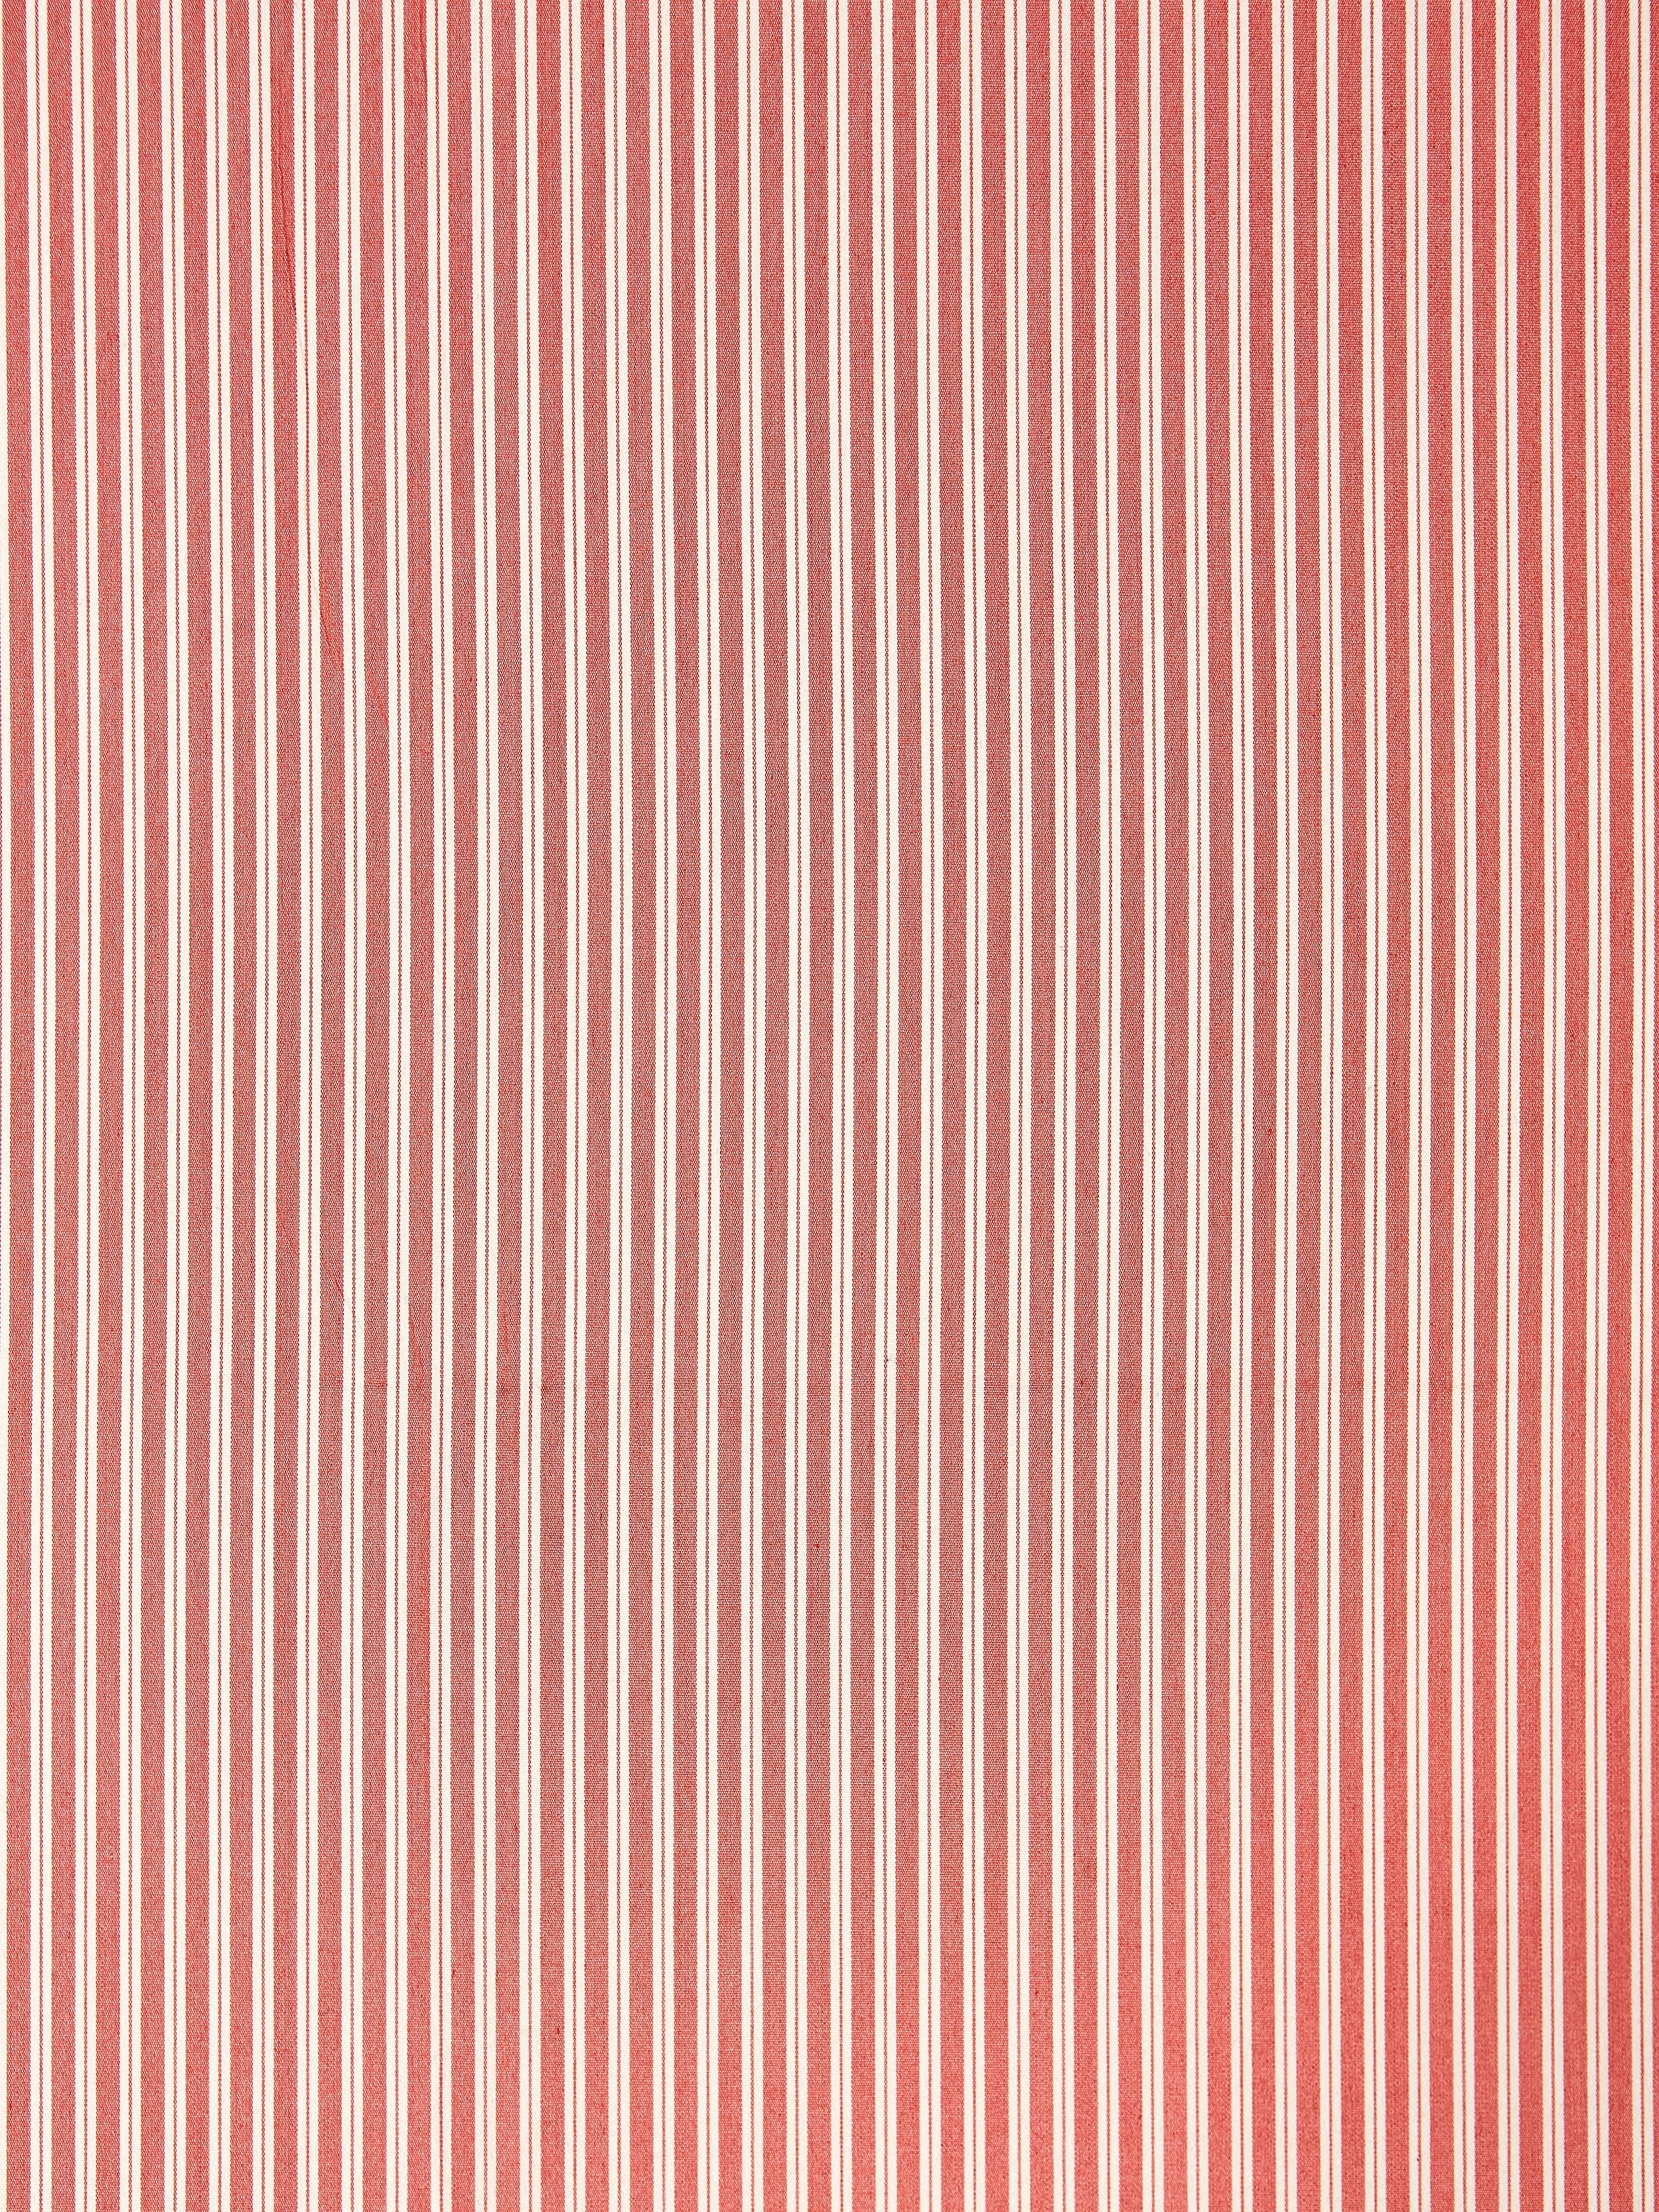 Kent Stripe fabric in blush color - pattern number SC 000336395 - by Scalamandre in the Scalamandre Fabrics Book 1 collection